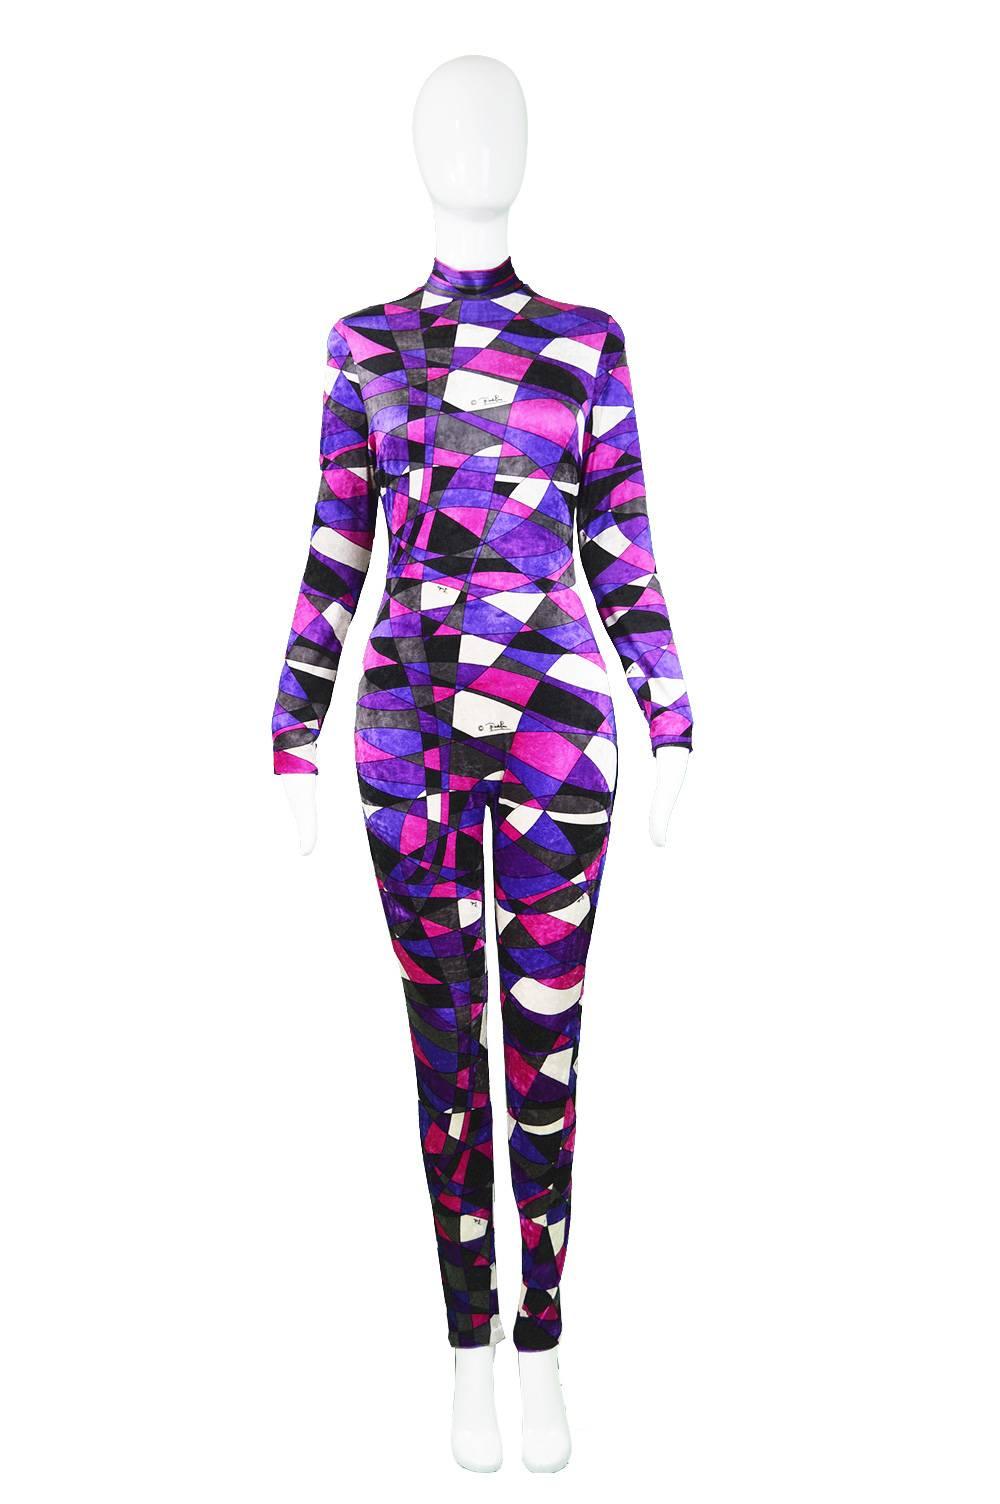 An incredible vintage Emilio Pucci jumpsuit/ catsuit c. 1970s in a stretch velvet/ velour in a kaleidoscope of pinks, purples, blues and whites with Pucci's signature throughout. An incredibly rare piece for Pucci collector's makes the perfect